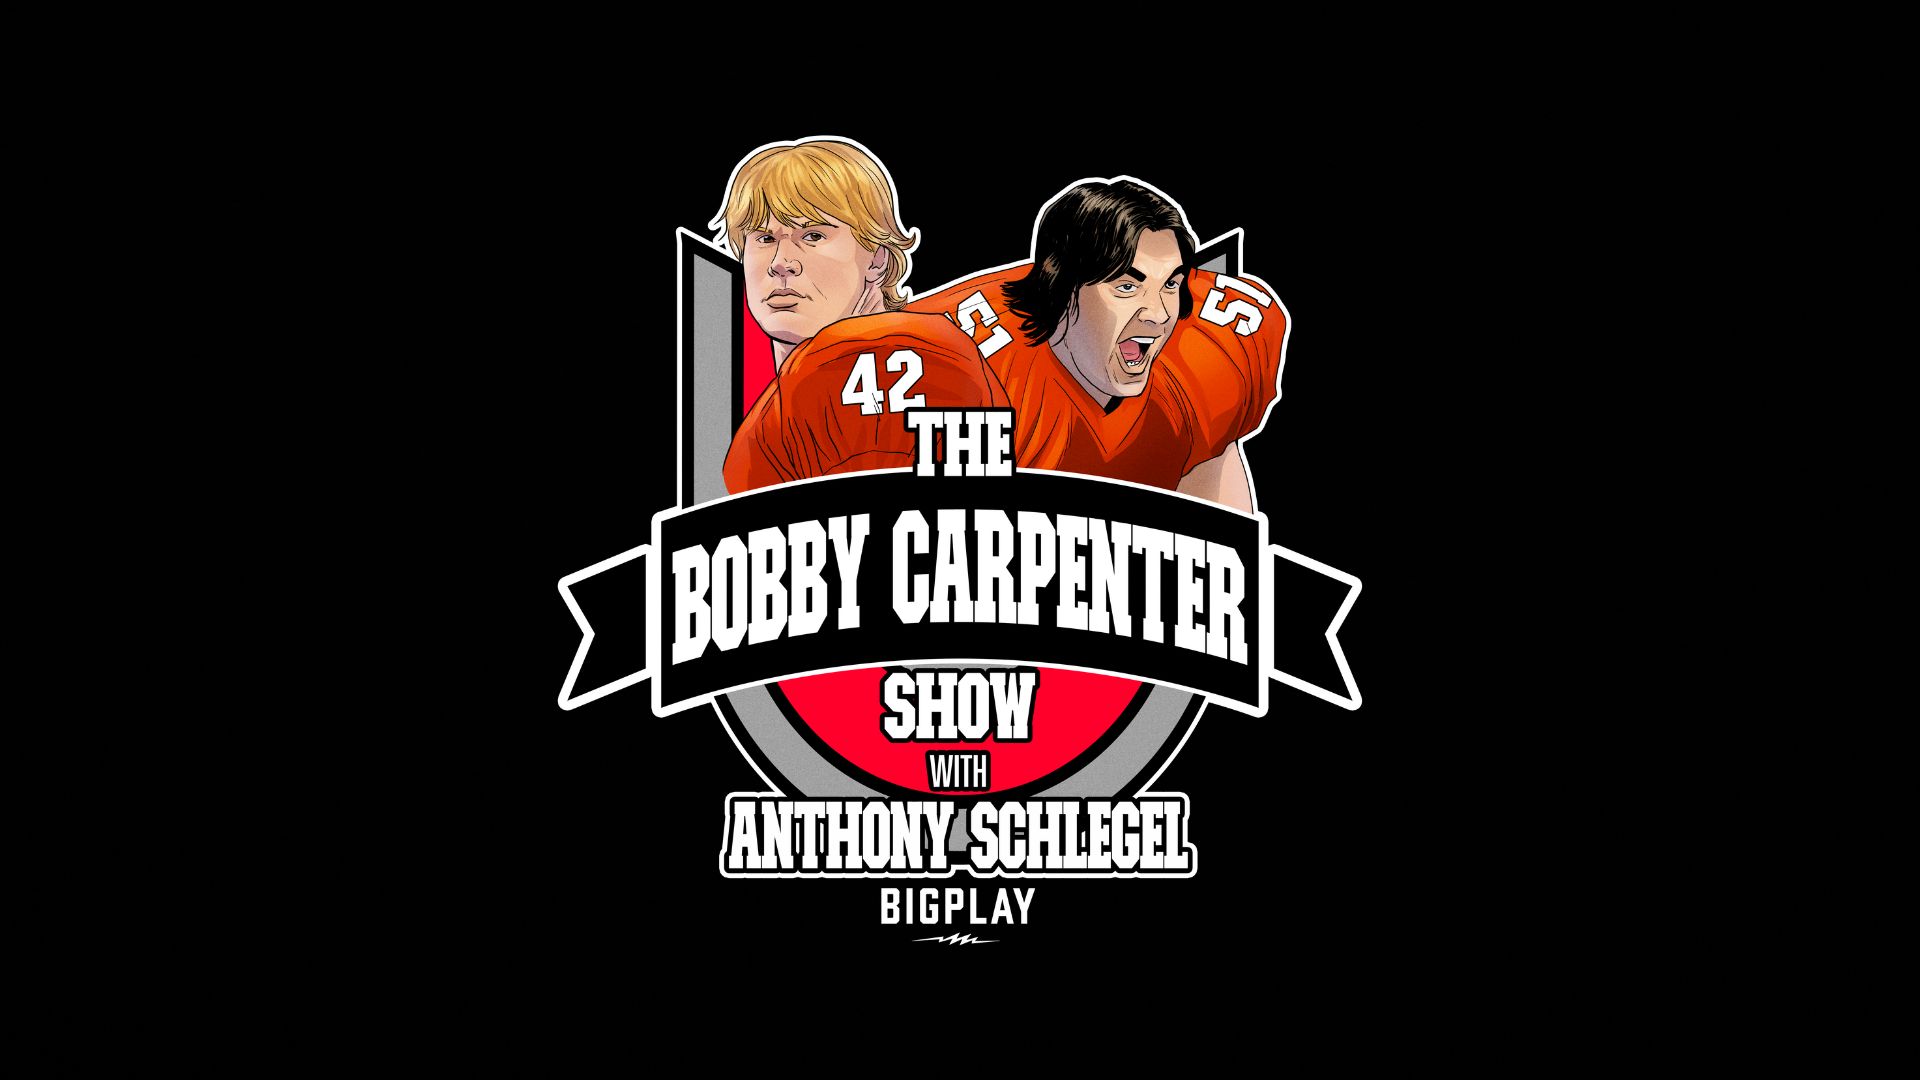 Art for The Bobby Carpenter Show by BIGPLAY